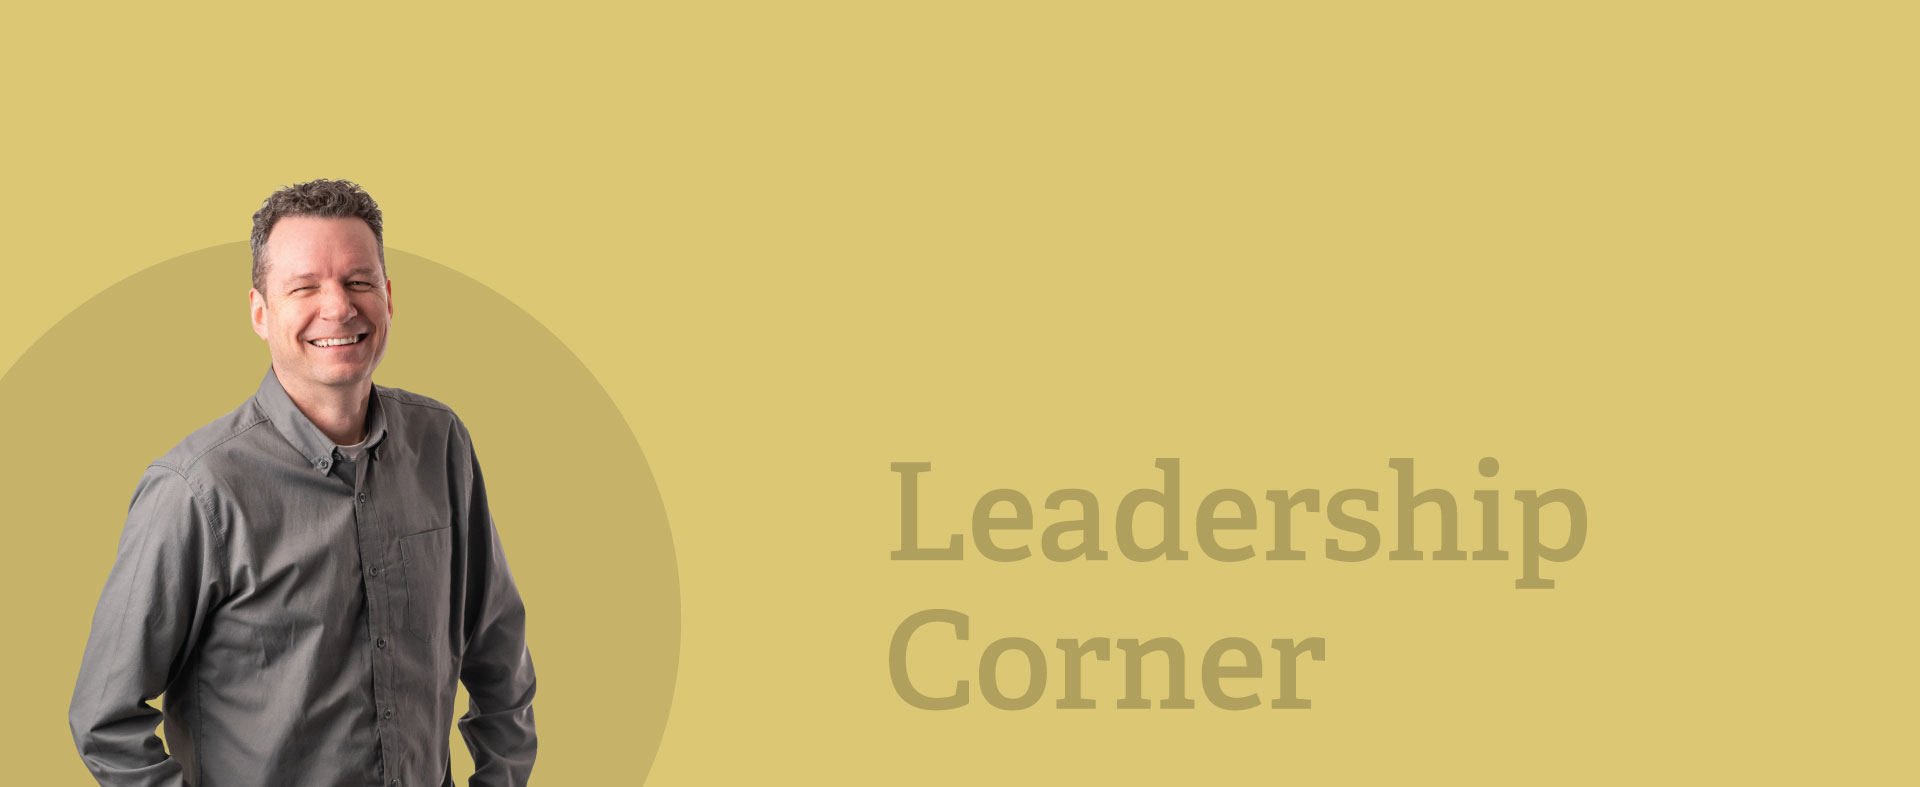 Introducing the DKY Leadership Corner Video Series